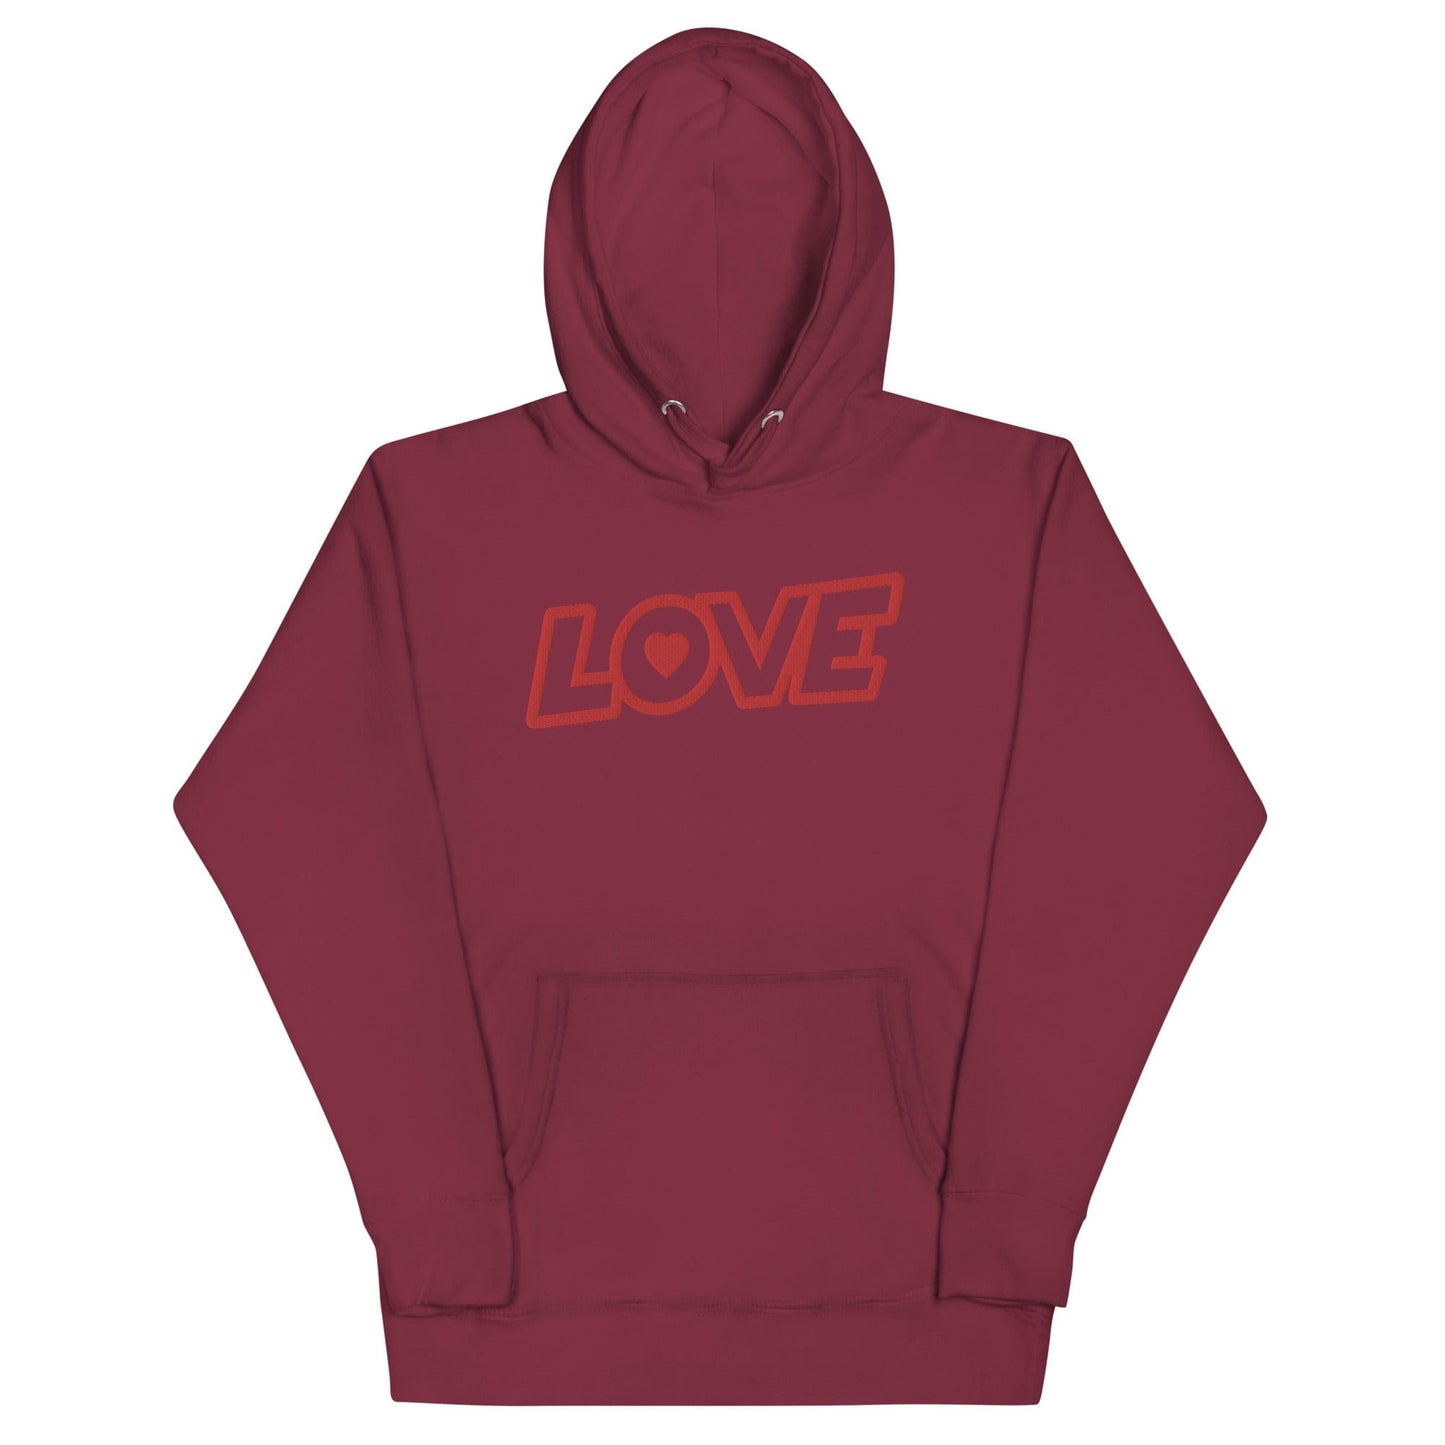 Embroidered Love Hoodie